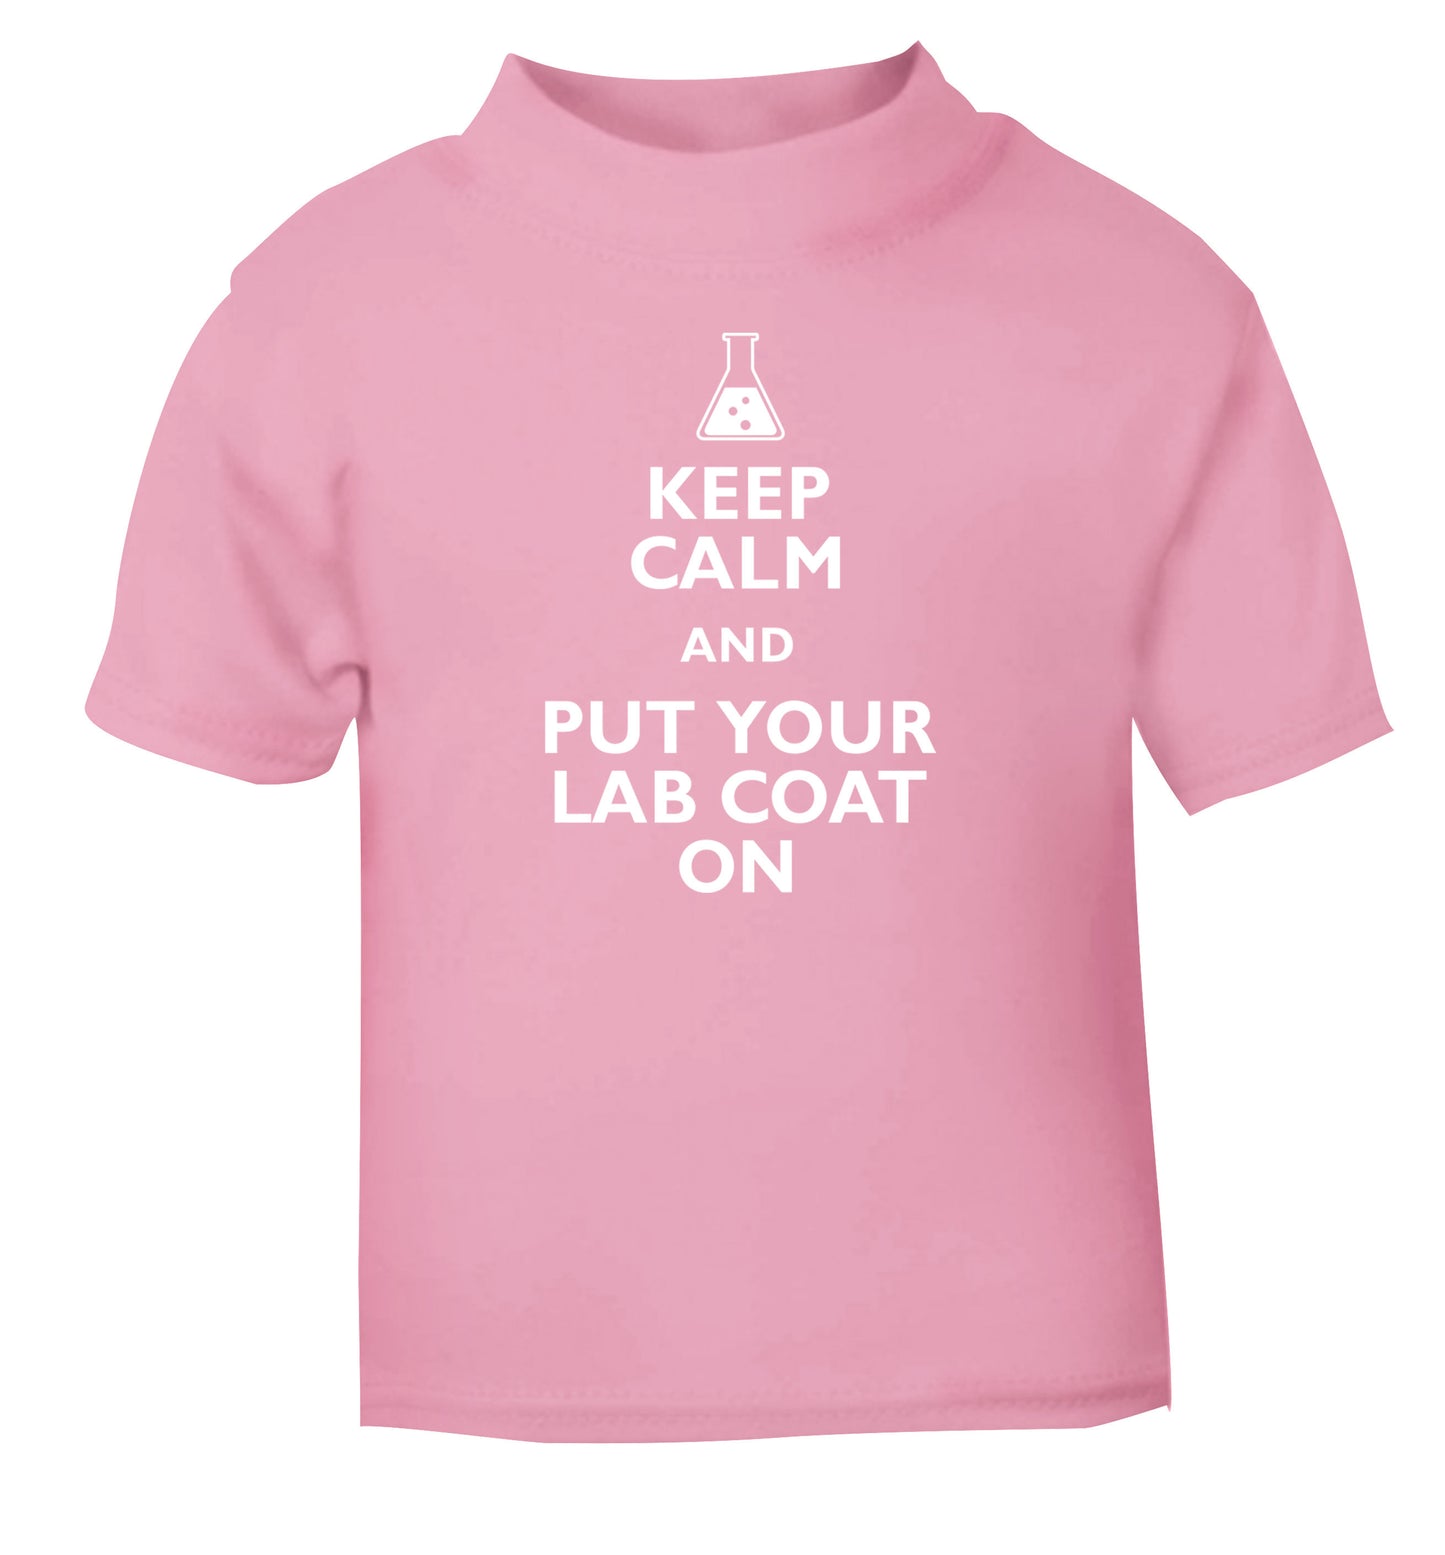 Keep calm and put your lab coat on light pink Baby Toddler Tshirt 2 Years